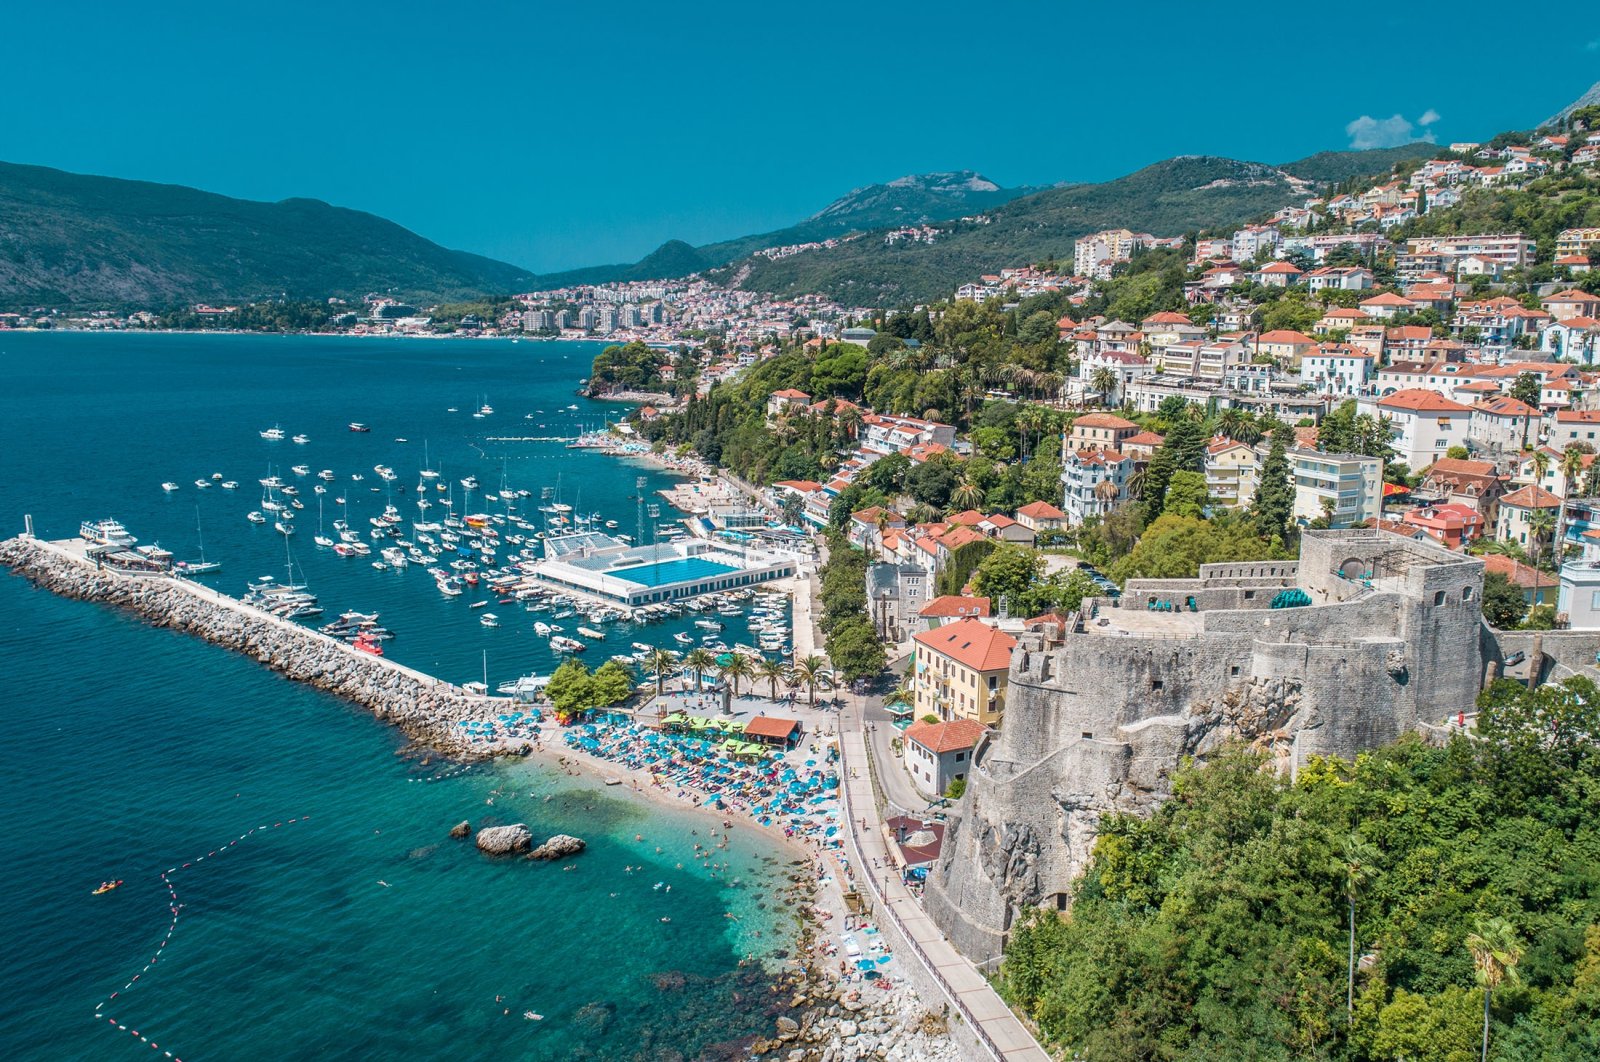 An aerial view shows the dazzling coastline and fortress in Herceg Novi, Montenegro. (Shutterstock Photo)